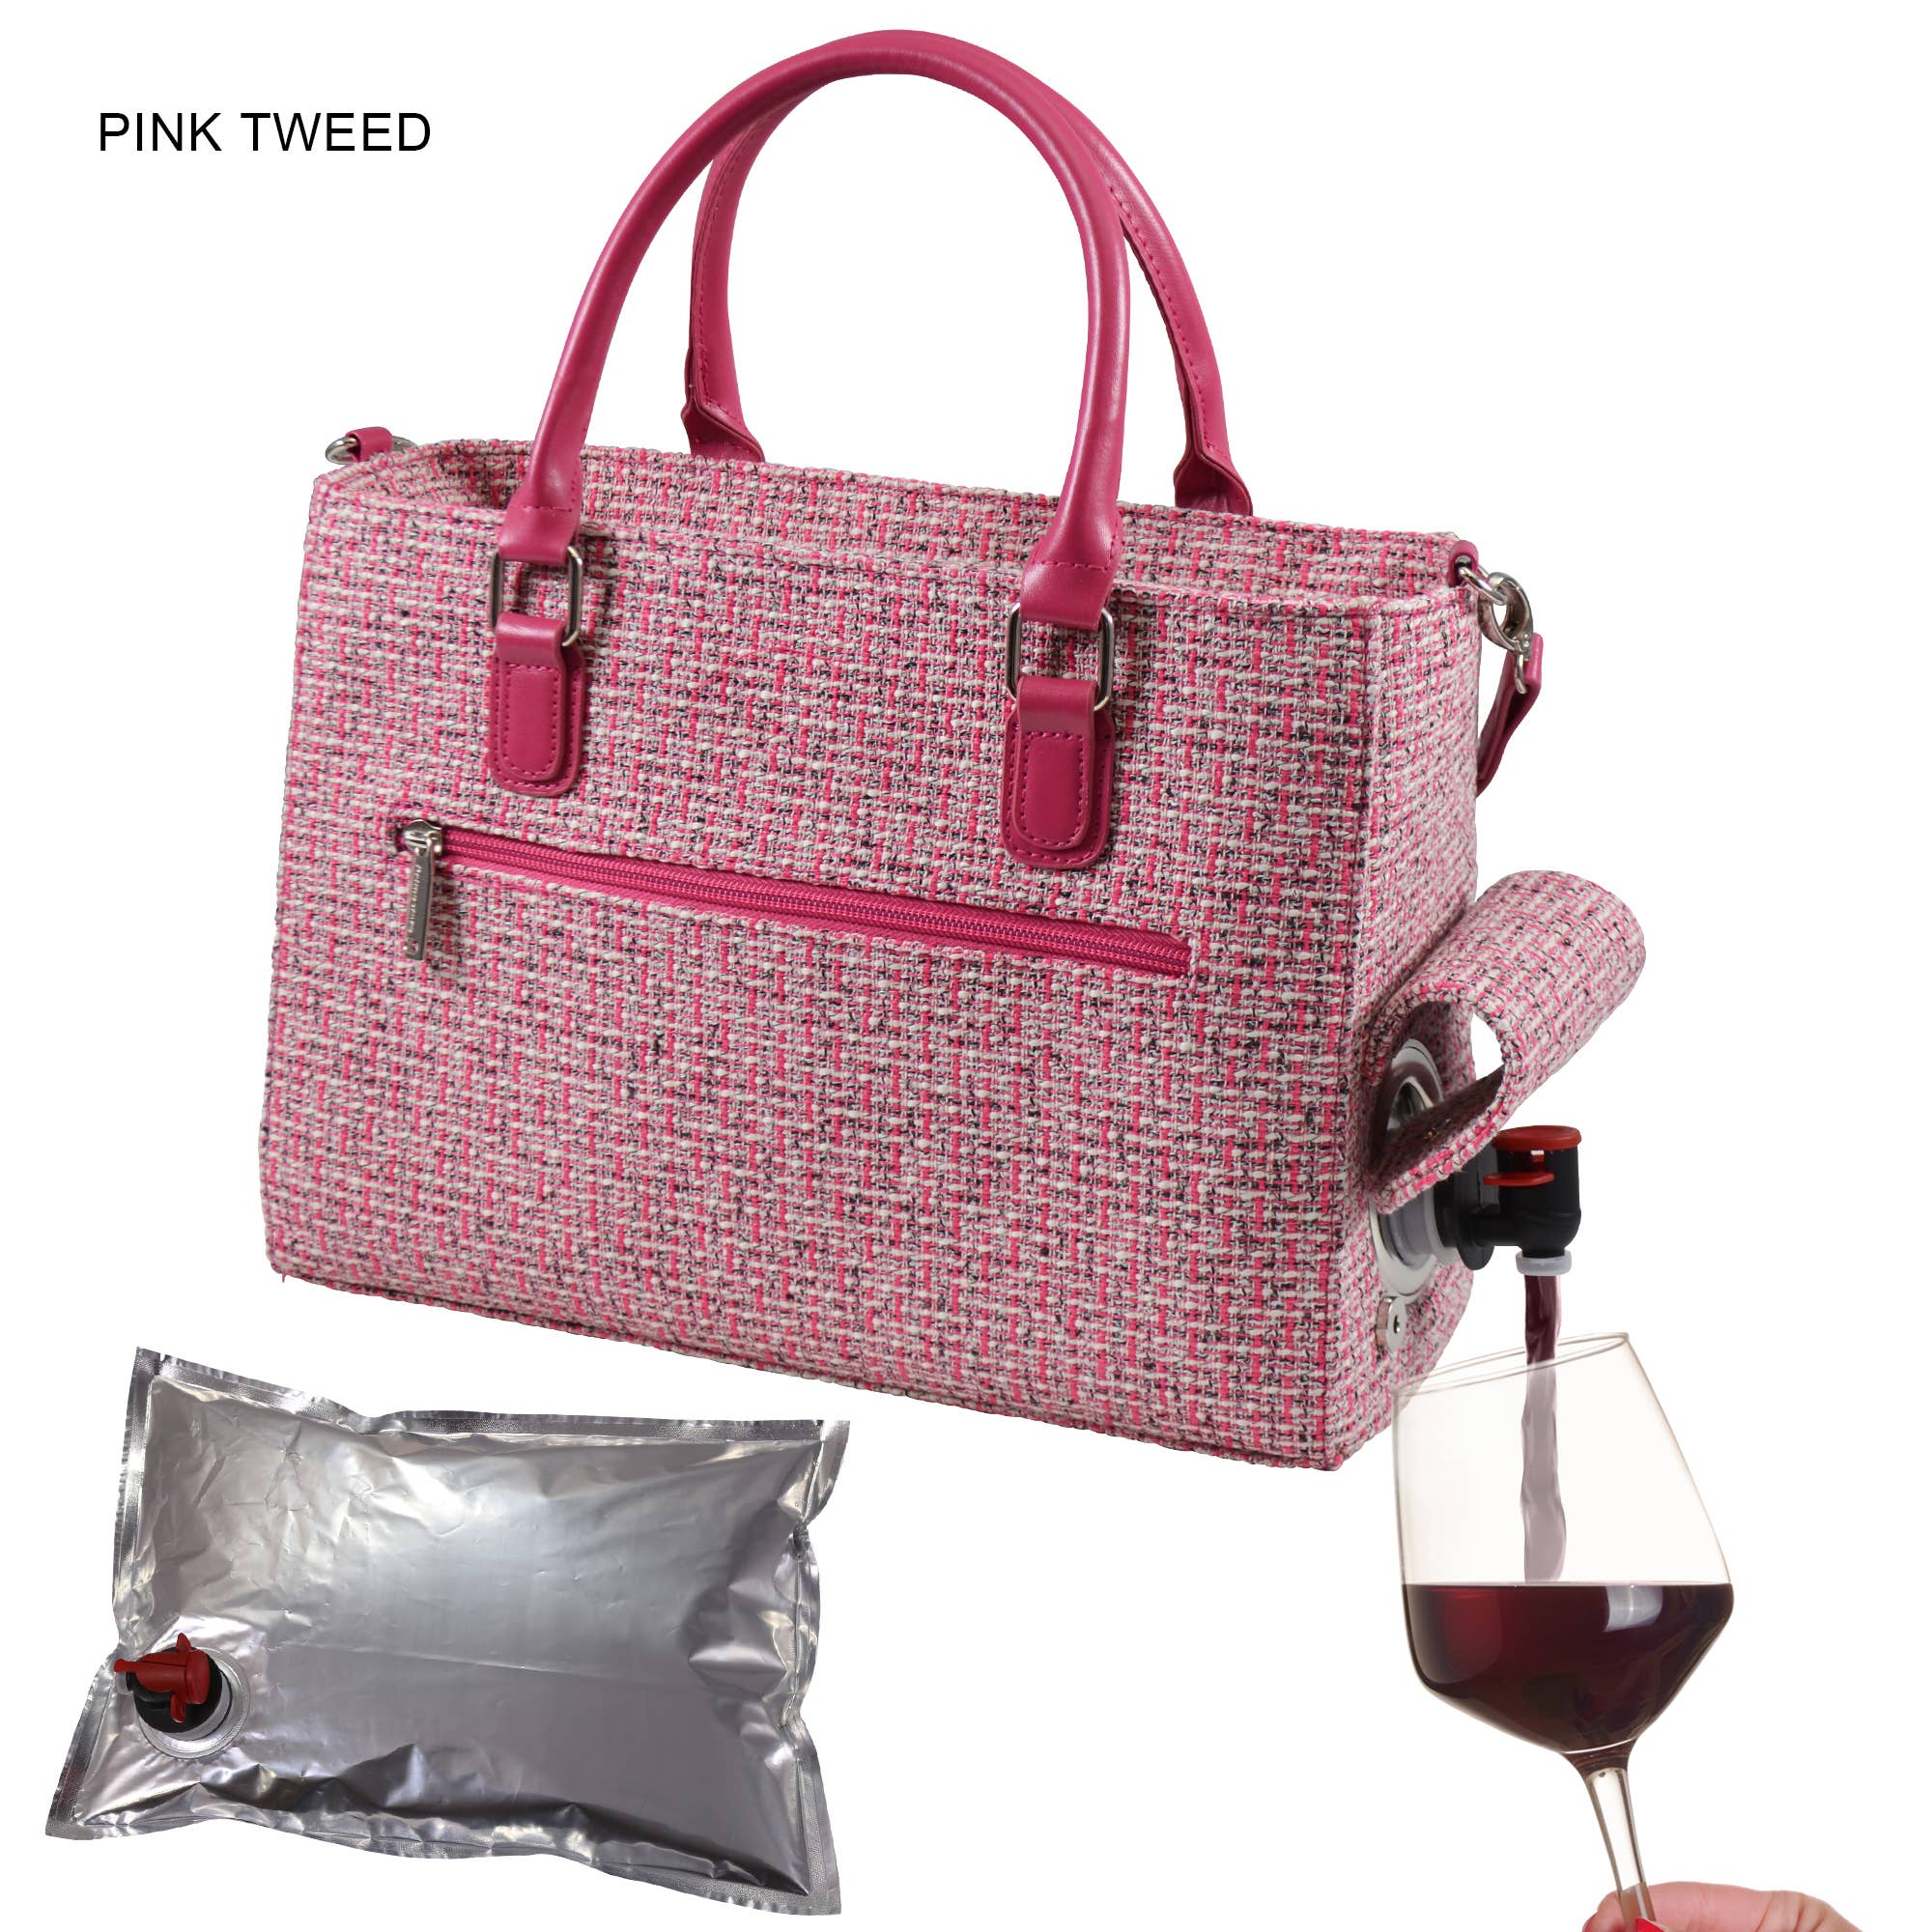 Bella Vita wine purse is a bag that lets you drink wine wherever you are |  Metro News